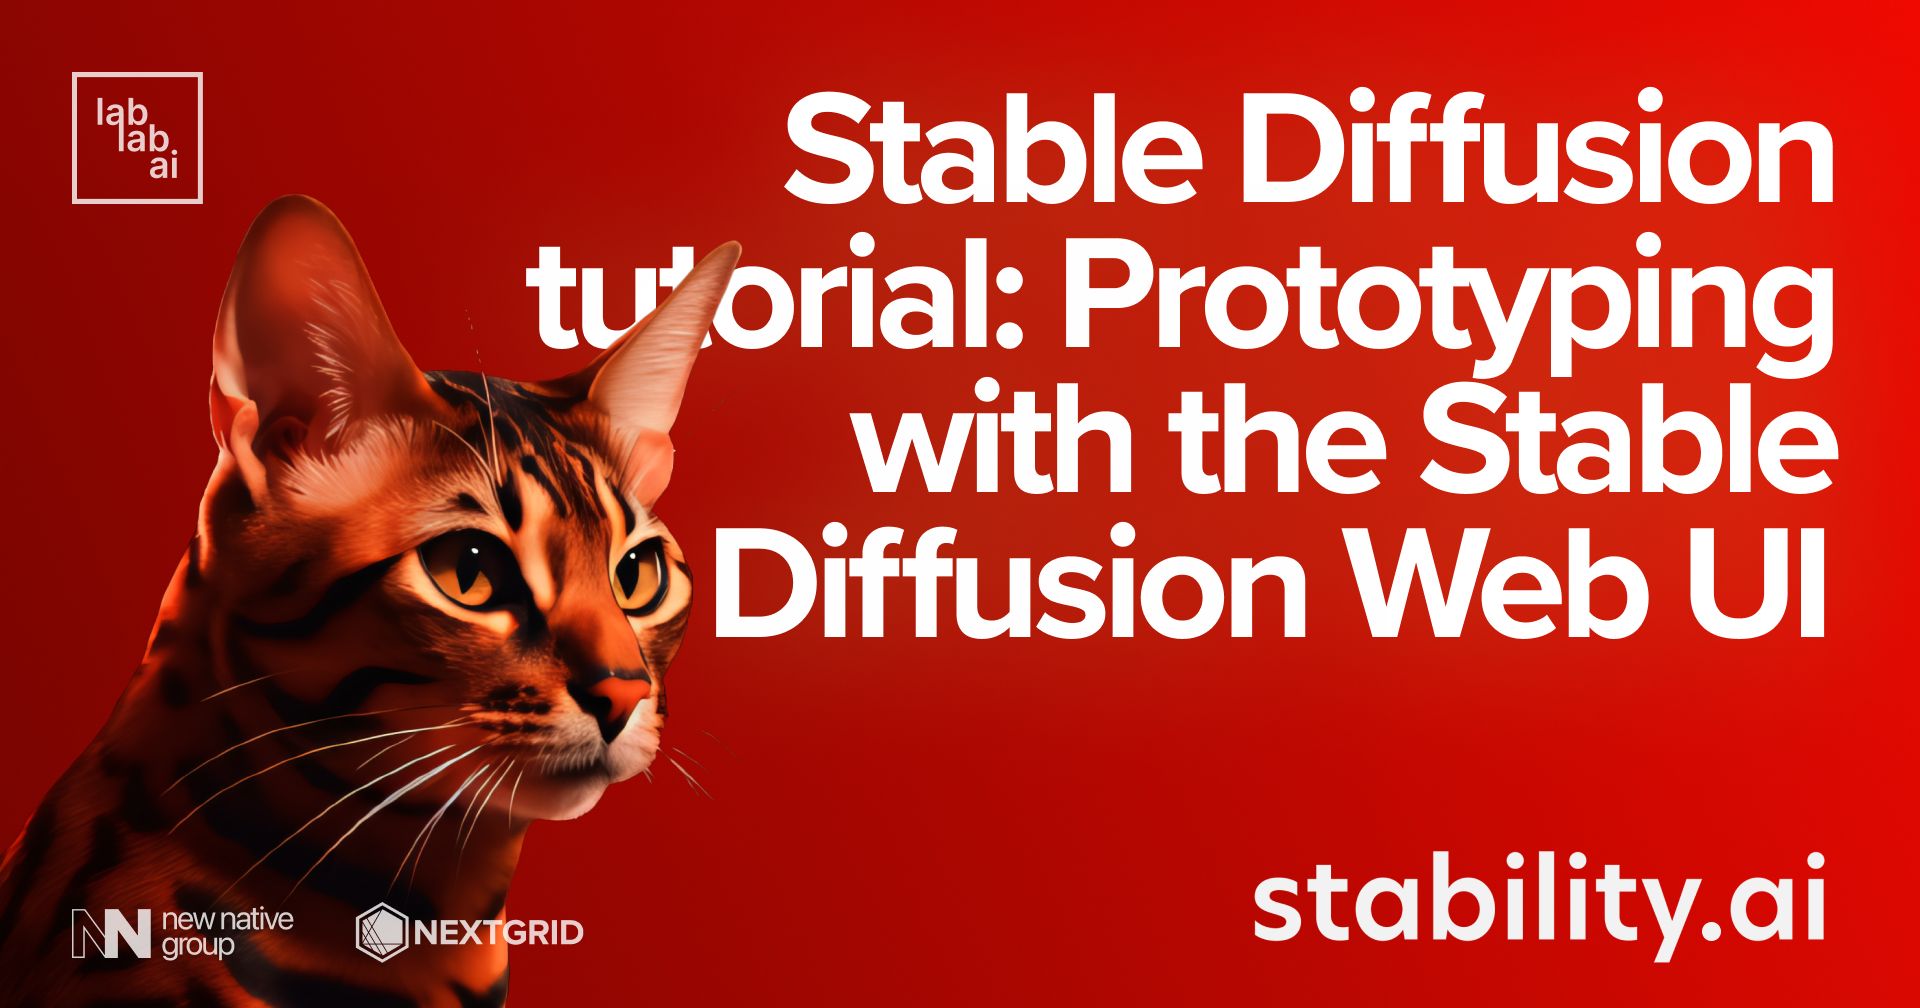 Stable Diffusion tutorial: Prototyping with the Stable Diffusion Web UI